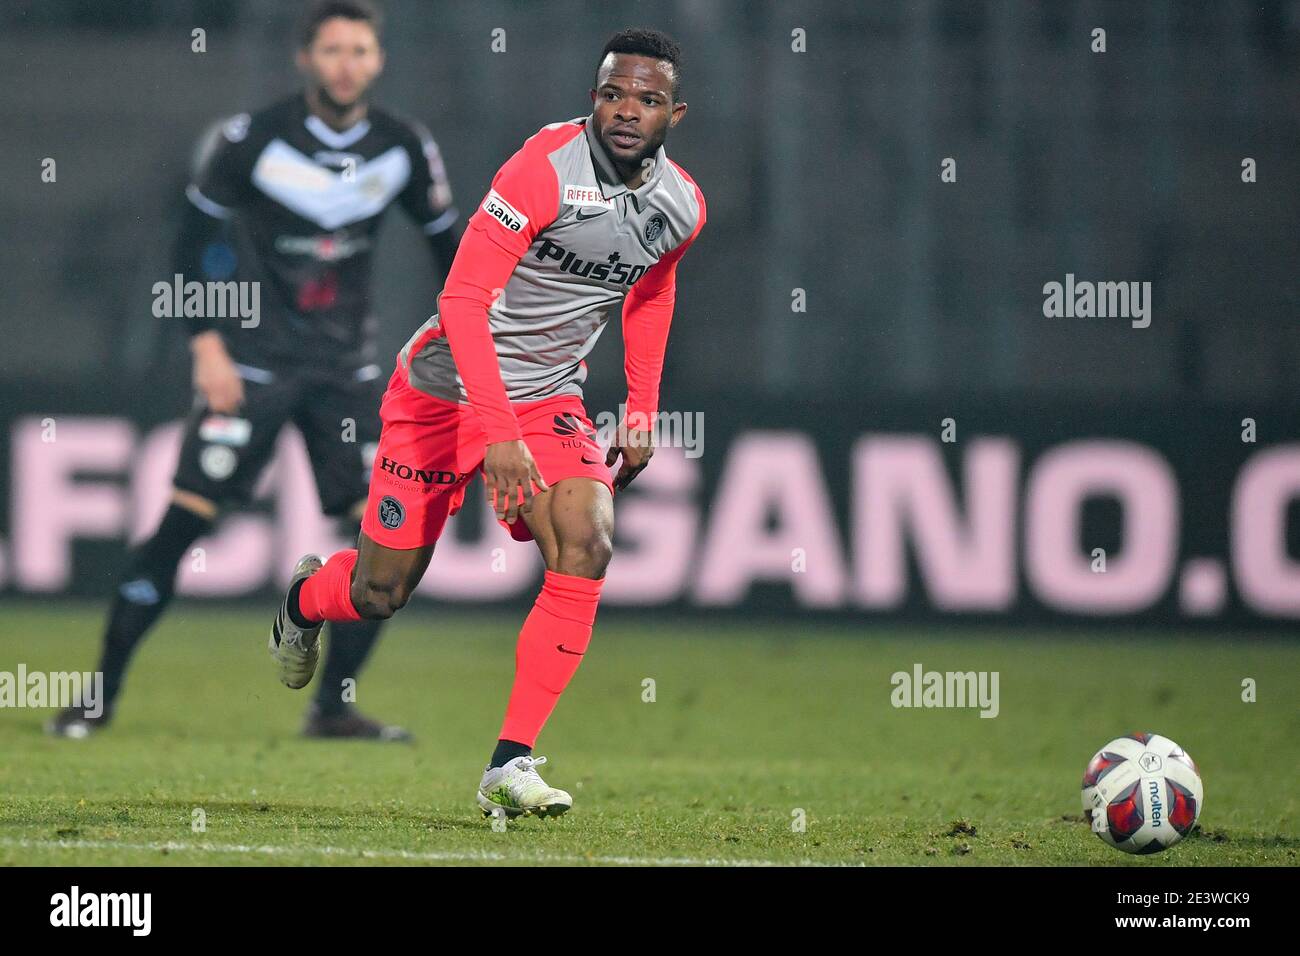 Lugano, Switzerland. 20th Jan, 2021. Meschack Elia (#15 BSC Young Boys)  during the Swiss Super League match between FC Lugano and BSC Young Boys at  Cornaredo Stadium in Lugano, Switzerland Credit: SPP